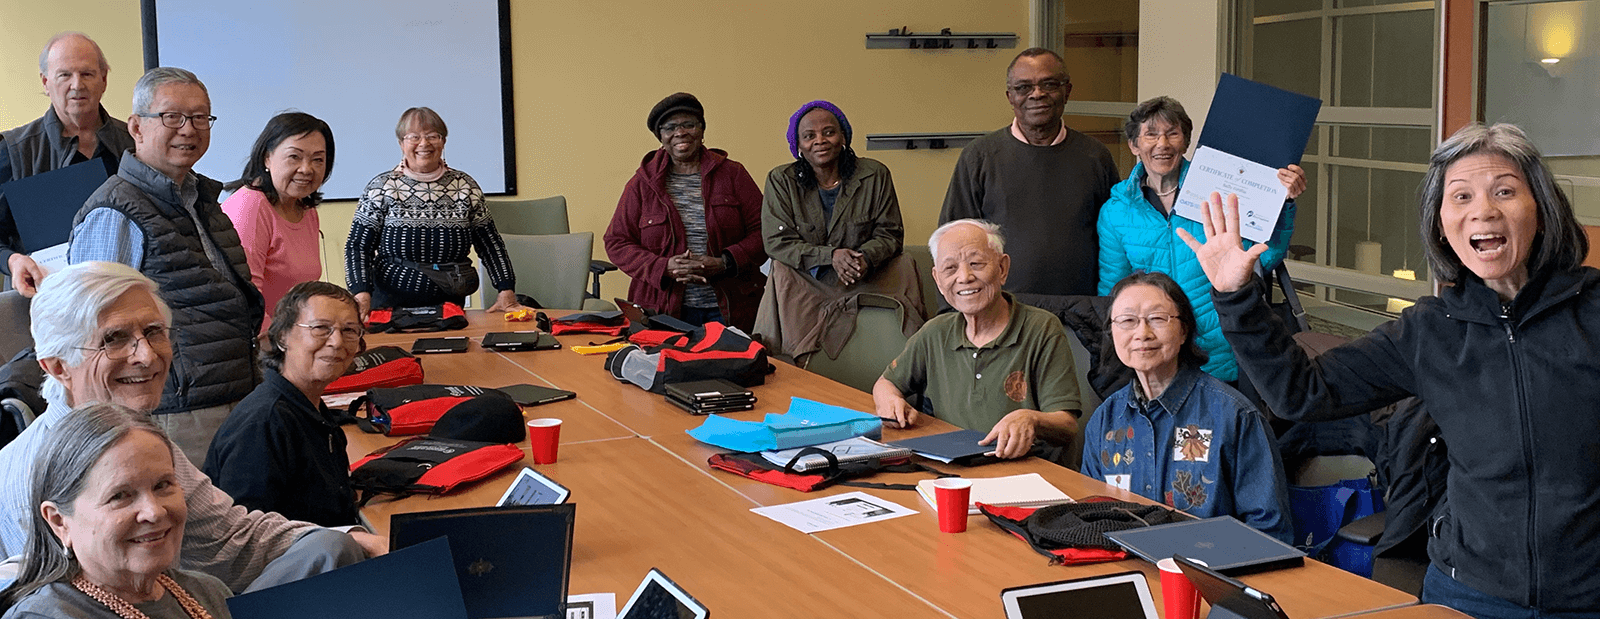 Digtal Equity Slider - Image of a group of seniors learning to use technology